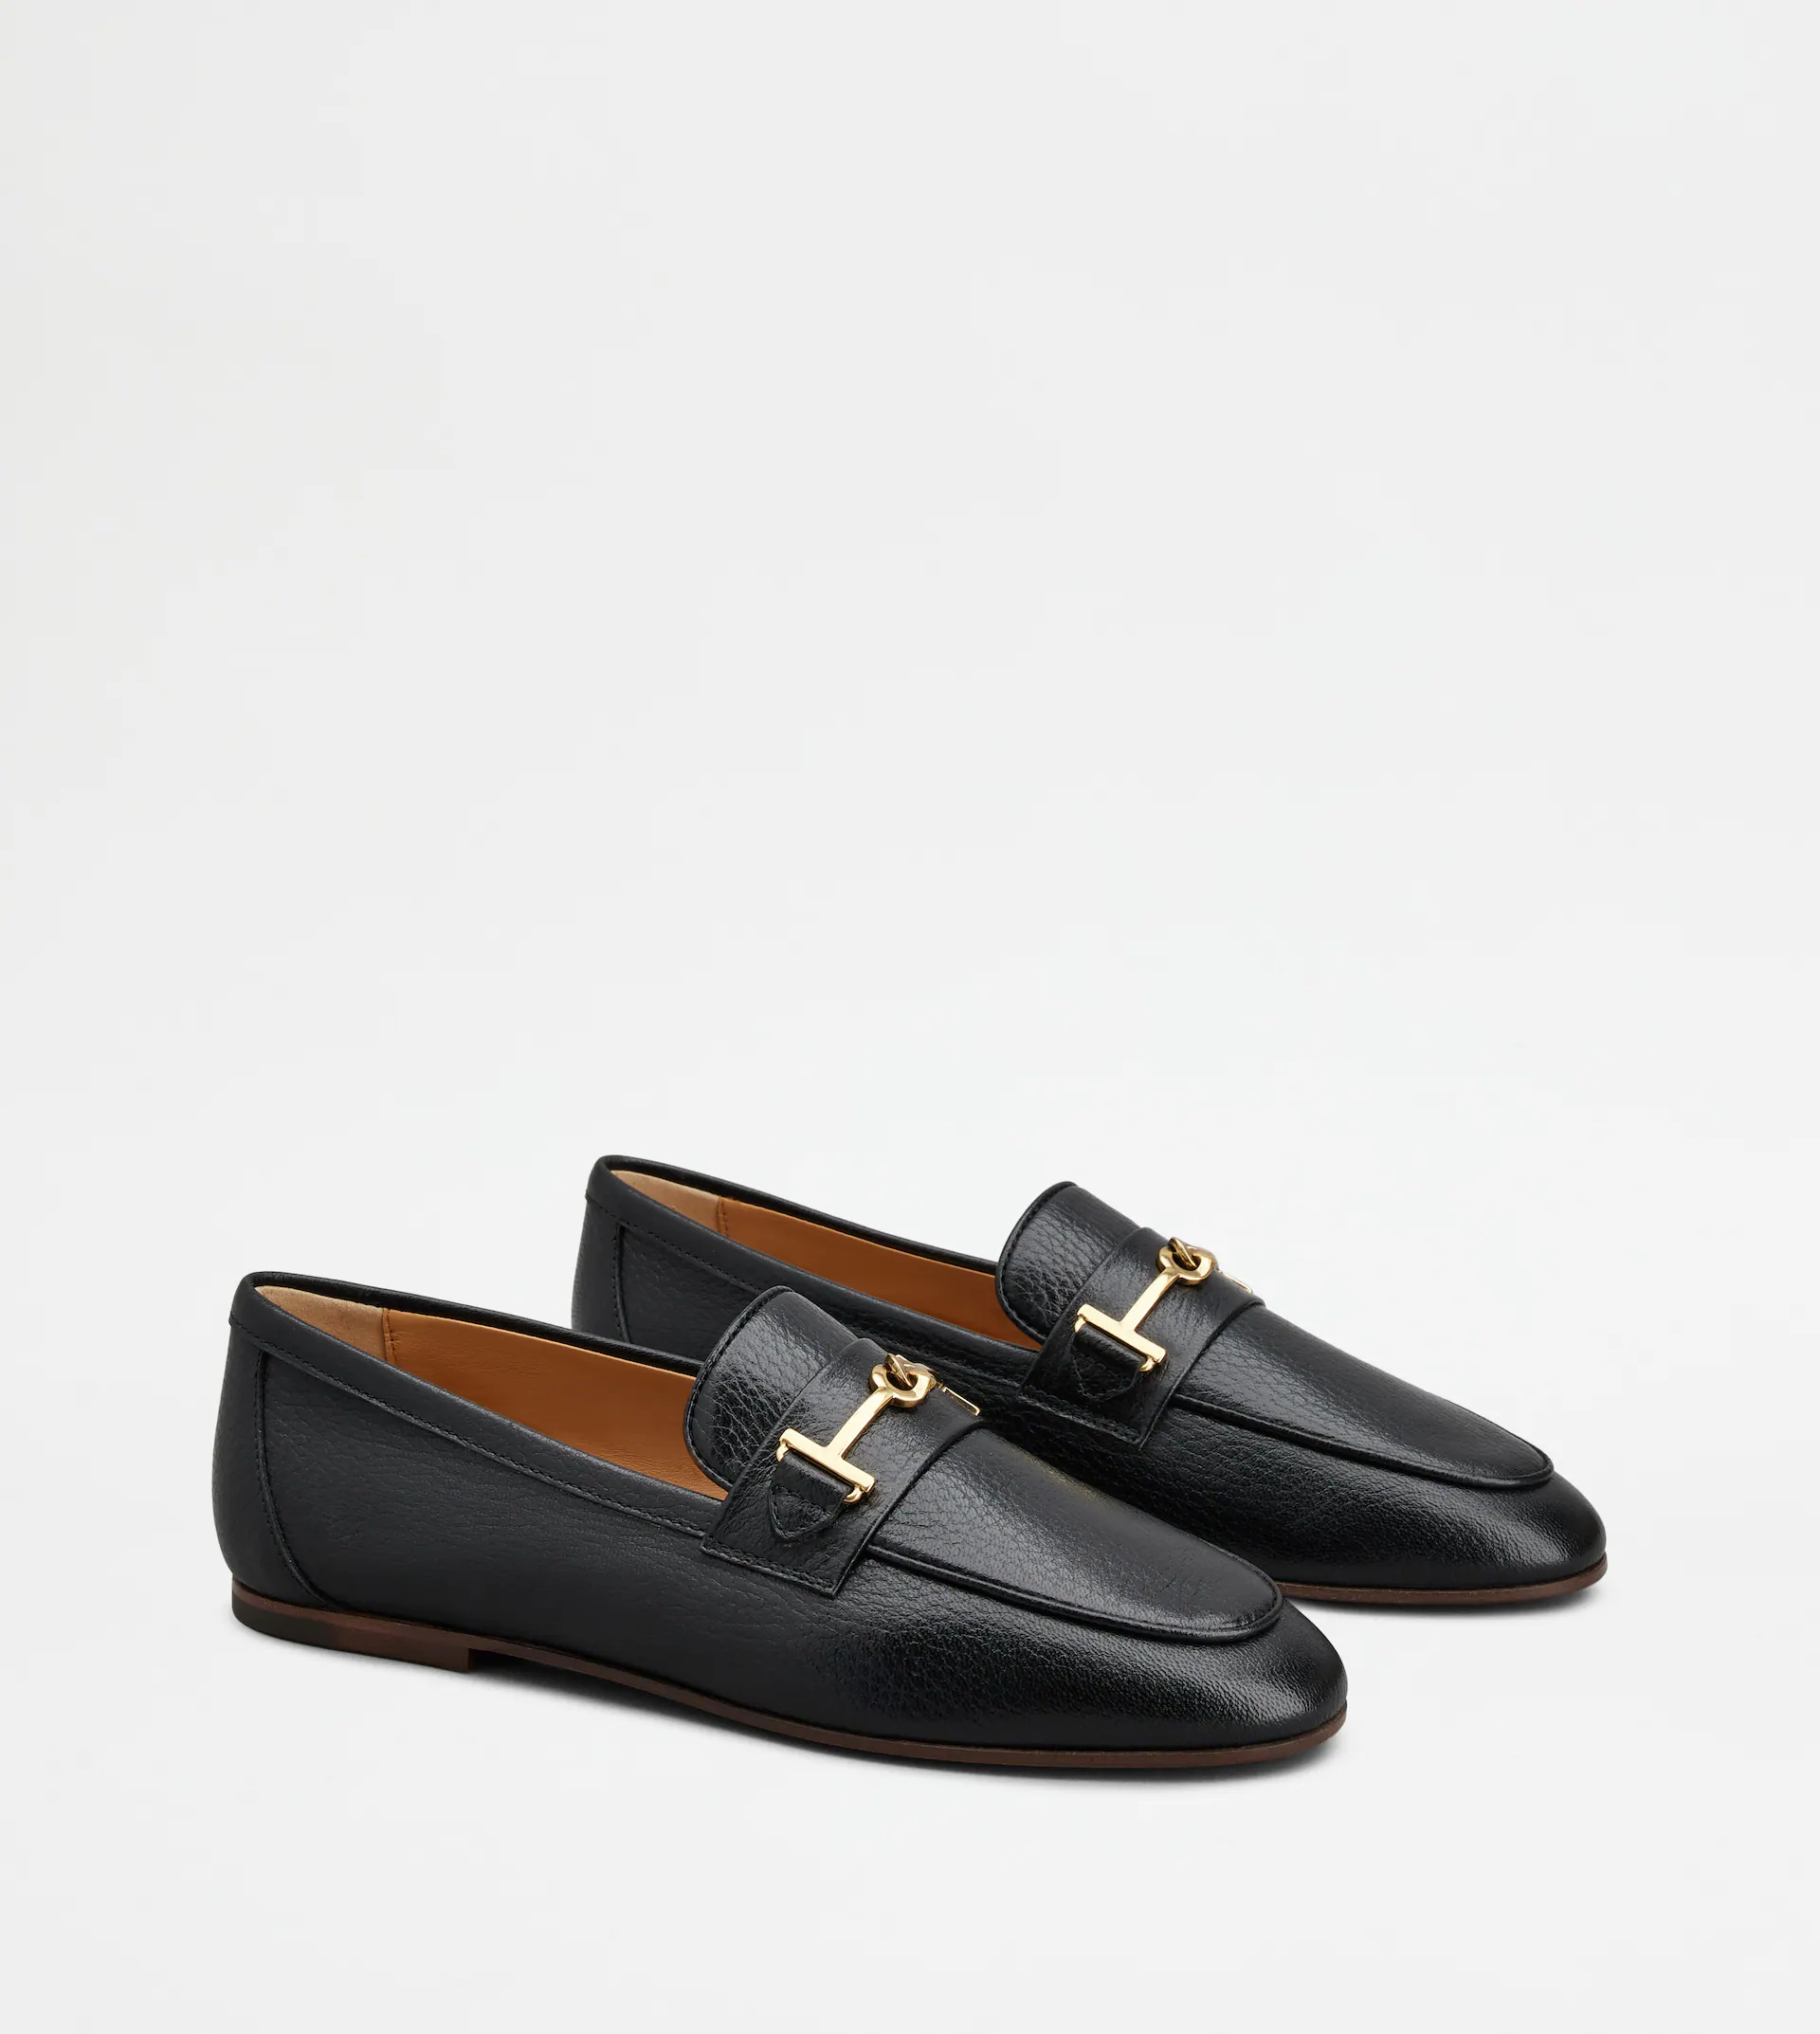 5 Designer Loafers For Work And Play